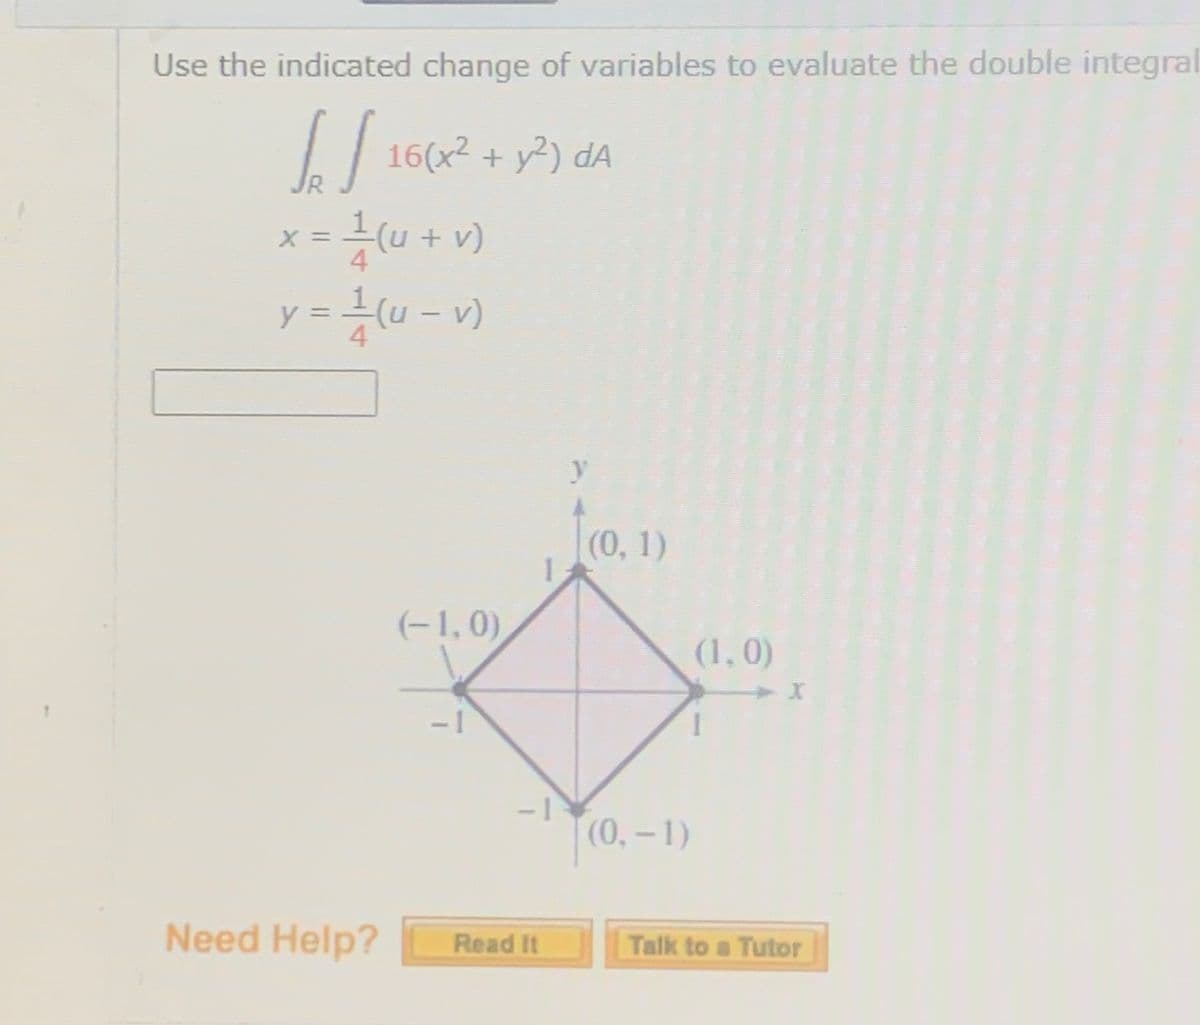 Use the indicated change of variables to evaluate the double integral
16(x2 + y²) dA
R.
| 16(2
1(u + v)
X =
4.
y = {(u - v)
4
tro, 1)
(-1,0)
(1,0)
- 1
(0, – 1)
Need Help?
Read It
Talk to a Tutor
